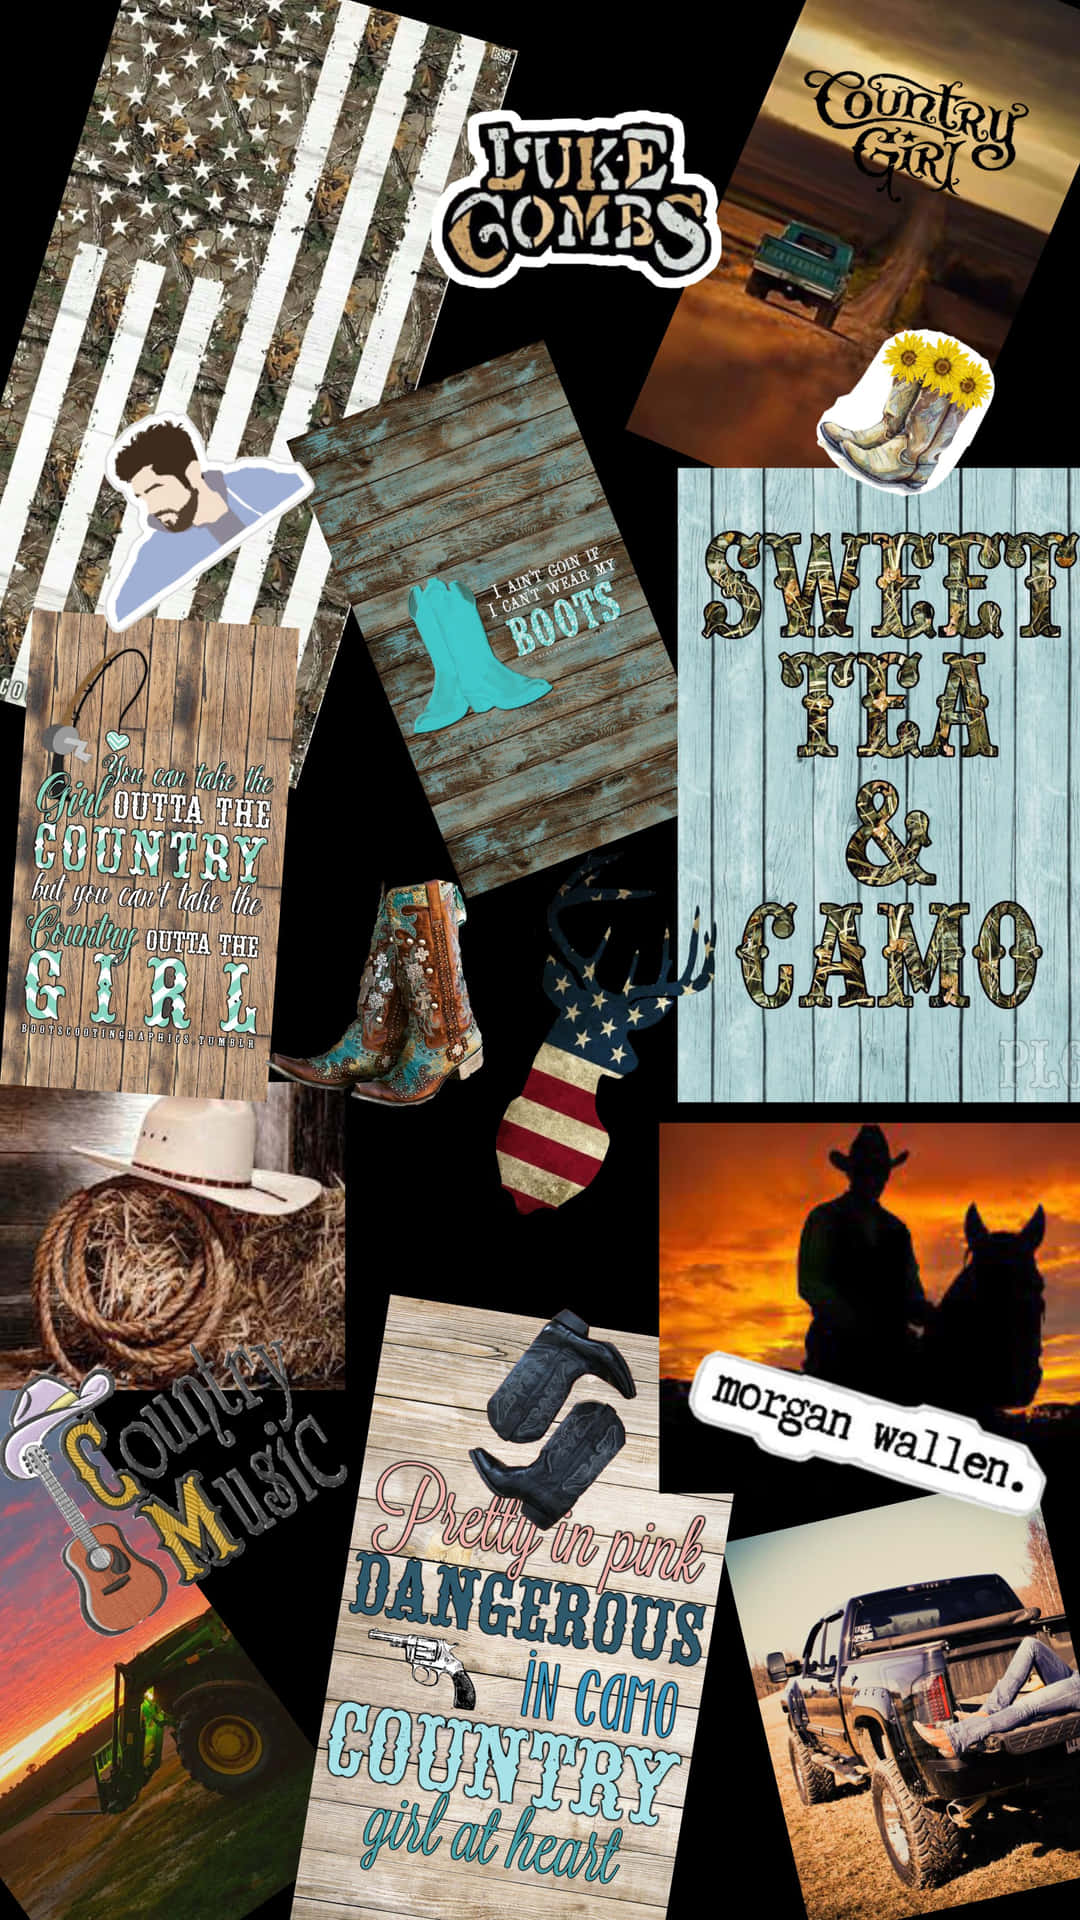 Cute Country Images And Musician Collage Background